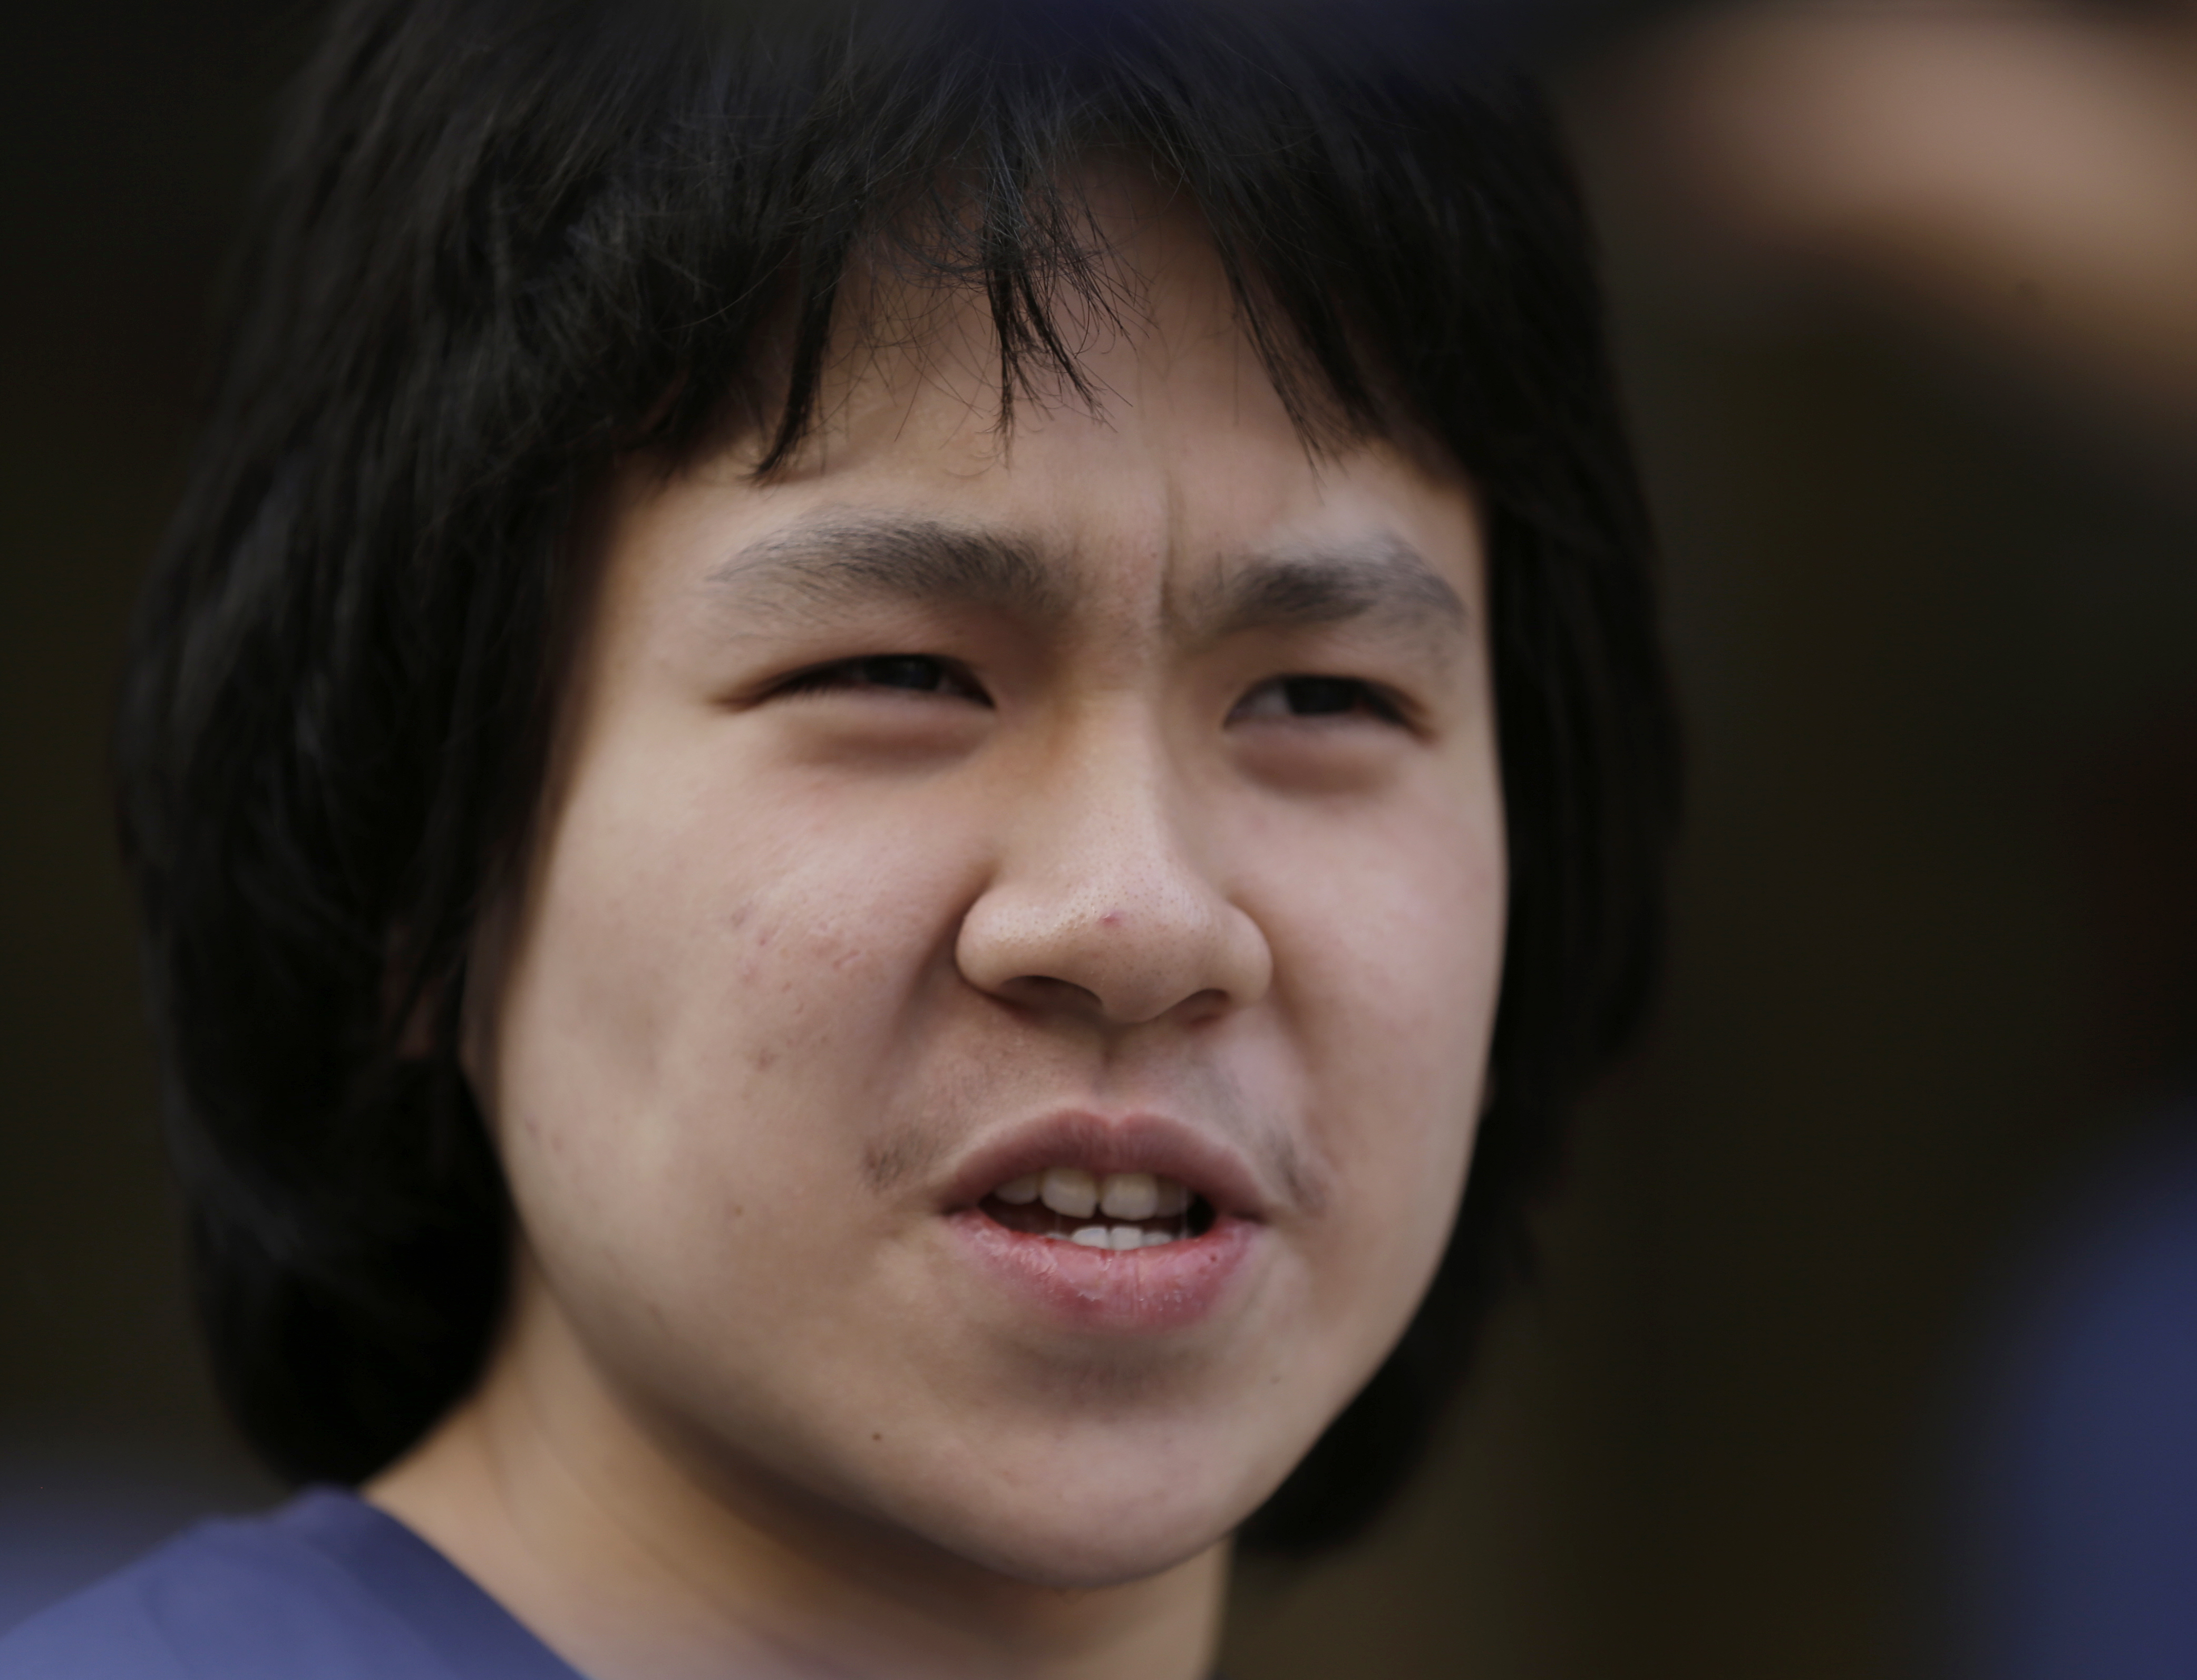 Little China Porn - Amos Yee, teen blogger granted U.S. asylum, faces child porn charges -  Washington Times